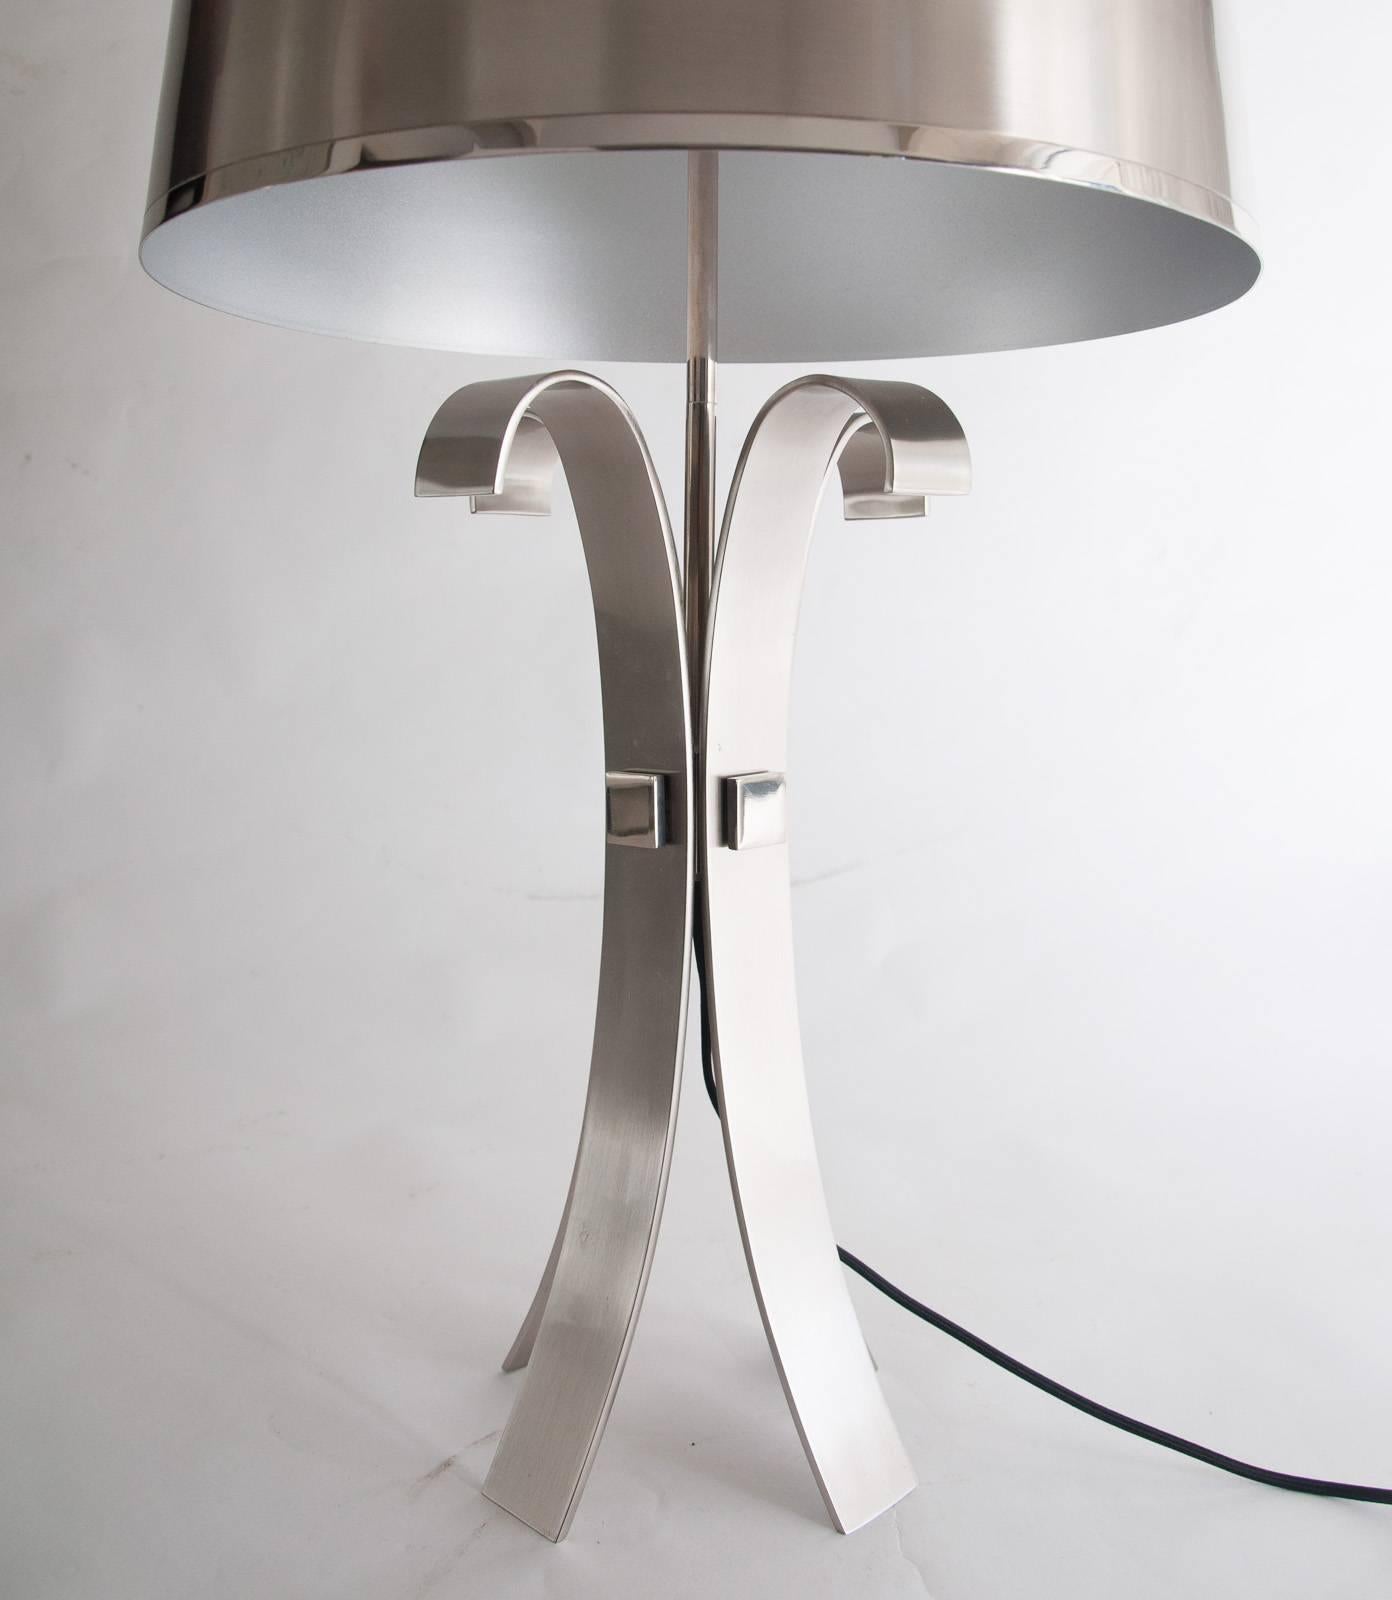 Corolle table lamp in brushed and stainless steel
designed by Jacques Charles in the 1970s Ex Charles showroom model, circa 2010.

Provenance: Maison Charles.